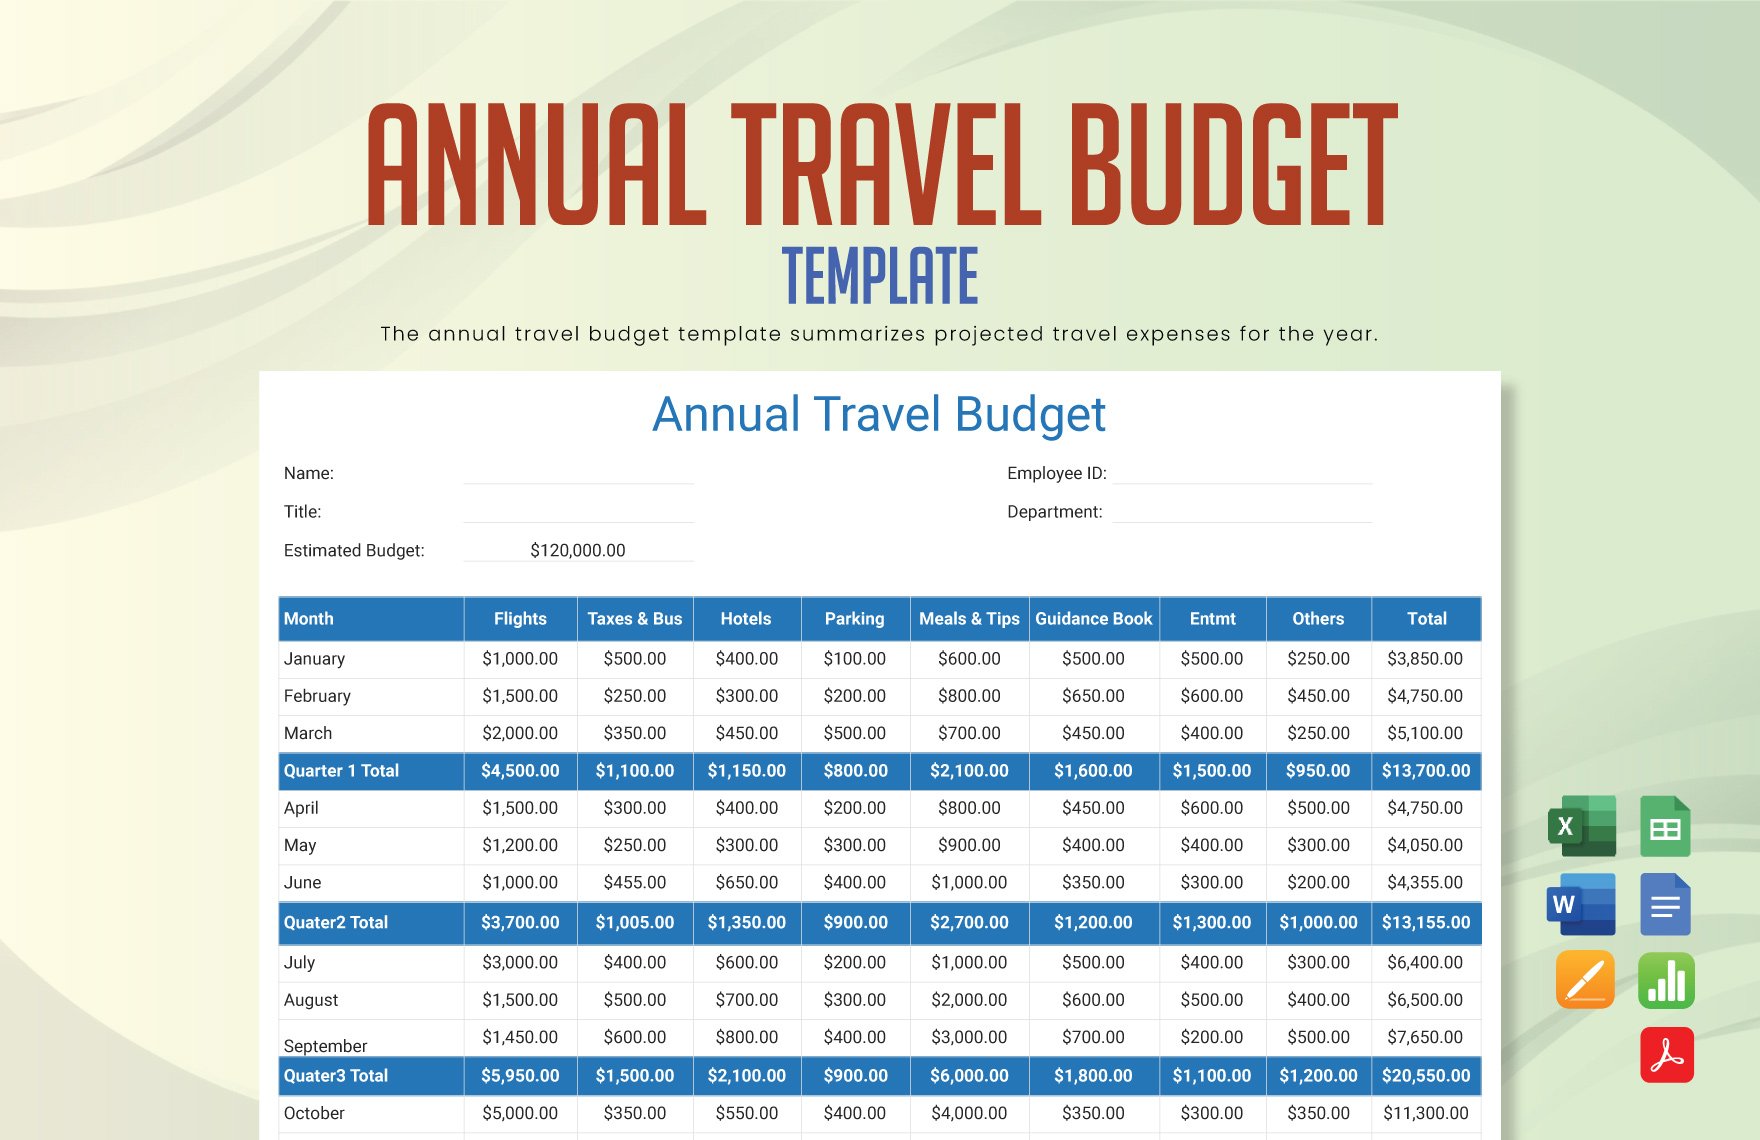 Annual Travel Budget Template in Word, Google Docs, Excel, PDF, Google Sheets, Apple Pages, Apple Numbers